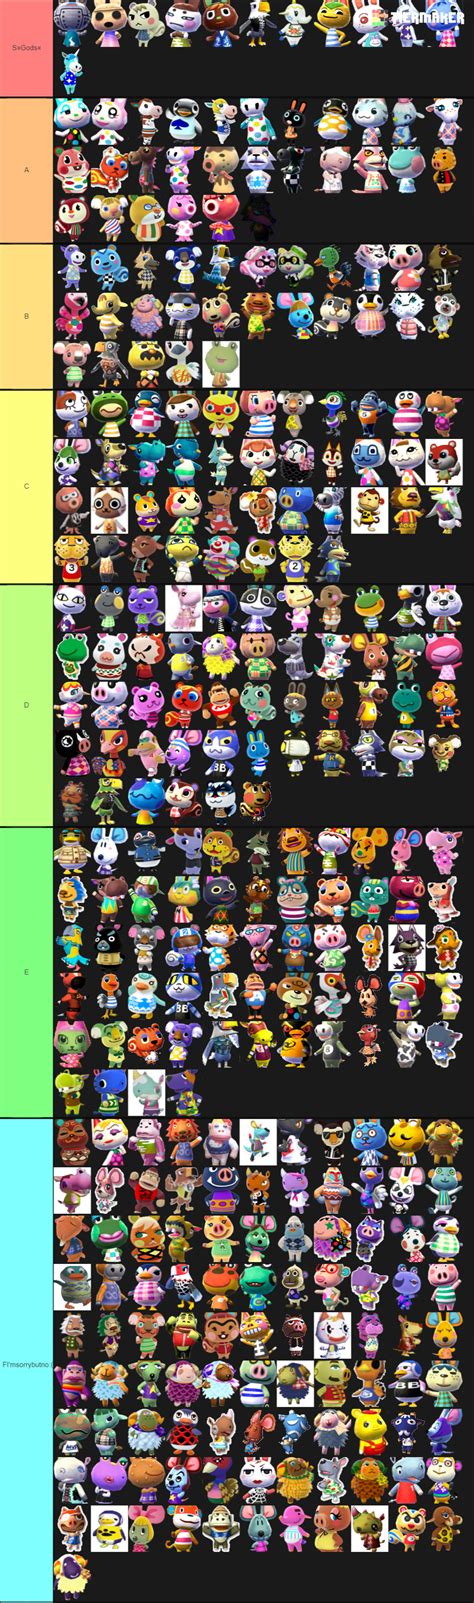 Animal crossing new horizons villager tier list. Jun 10, 2022 · In this Animal Crossing Tier List, we will be ranking the characters by their character design, personality, and popularity. Although over 350 Animal Crossing villagers are available, we’ll only be ranking the top 50 to give you a good idea of who’s hot and who’s not. Animal Crossing New Horizons villagers tier list 